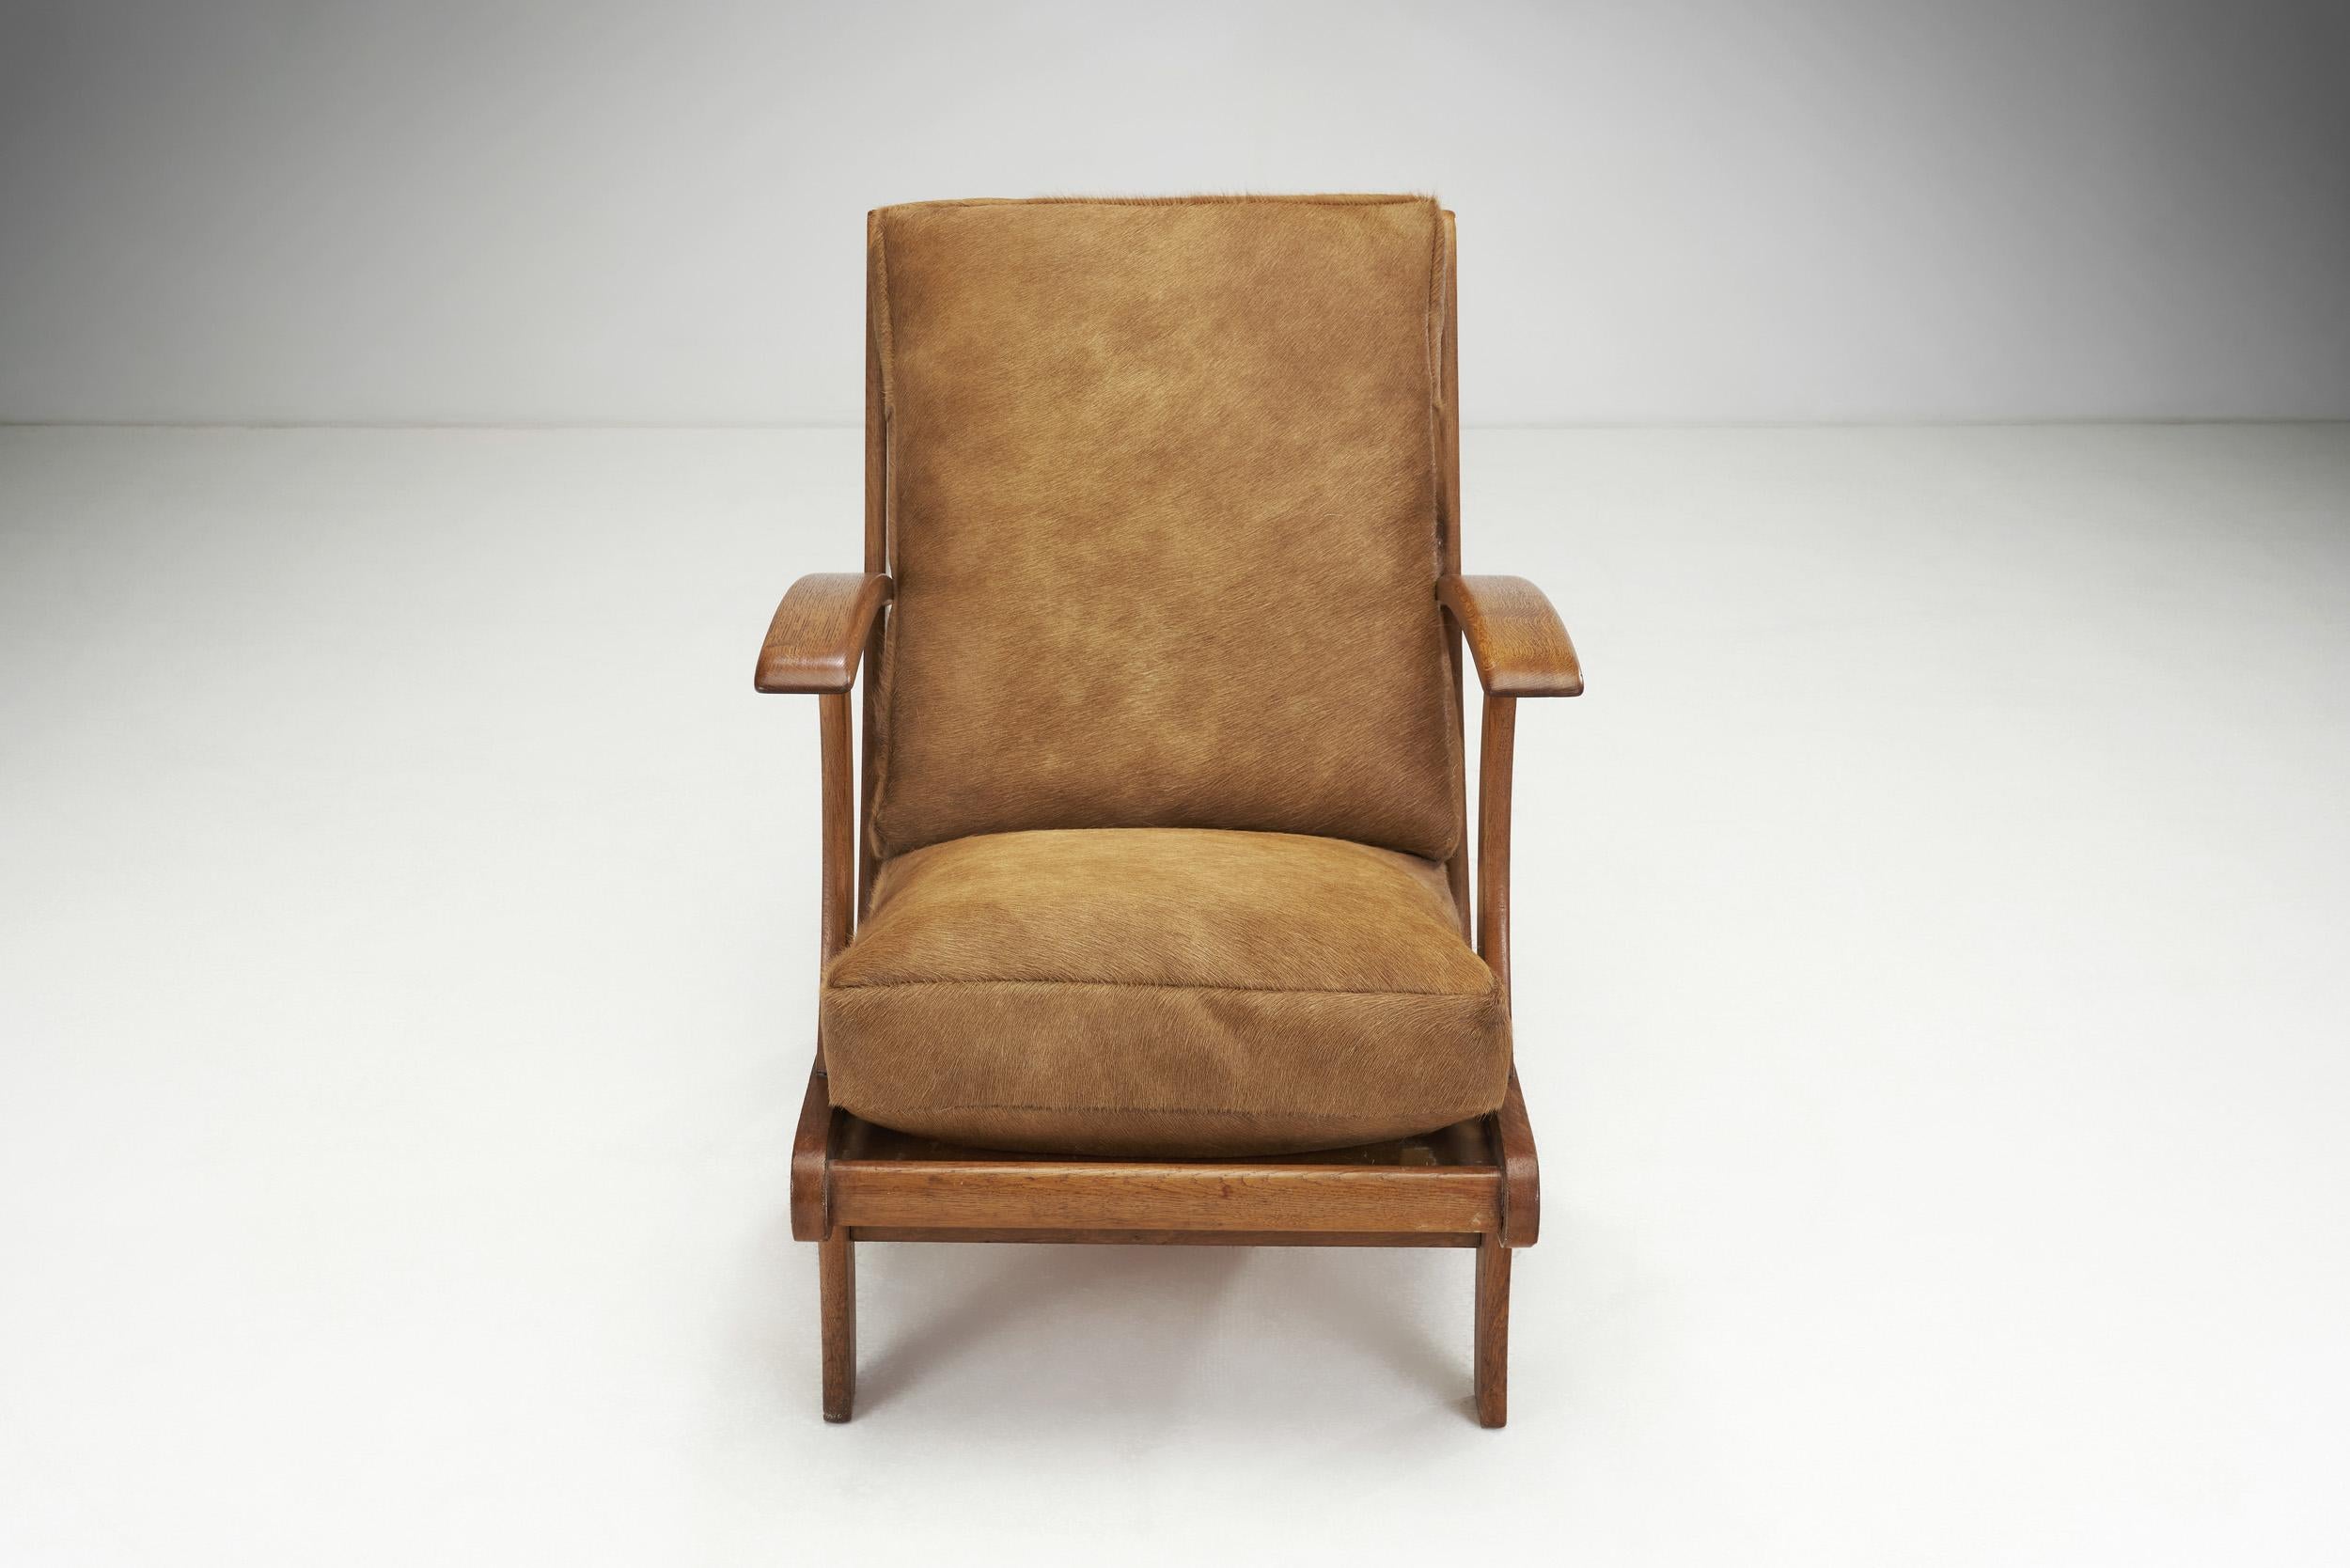 Mid-20th Century Sculptural Lounge Chair by Bas Van Pelt 'Attr.', The Netherlands, ca 1950s For Sale